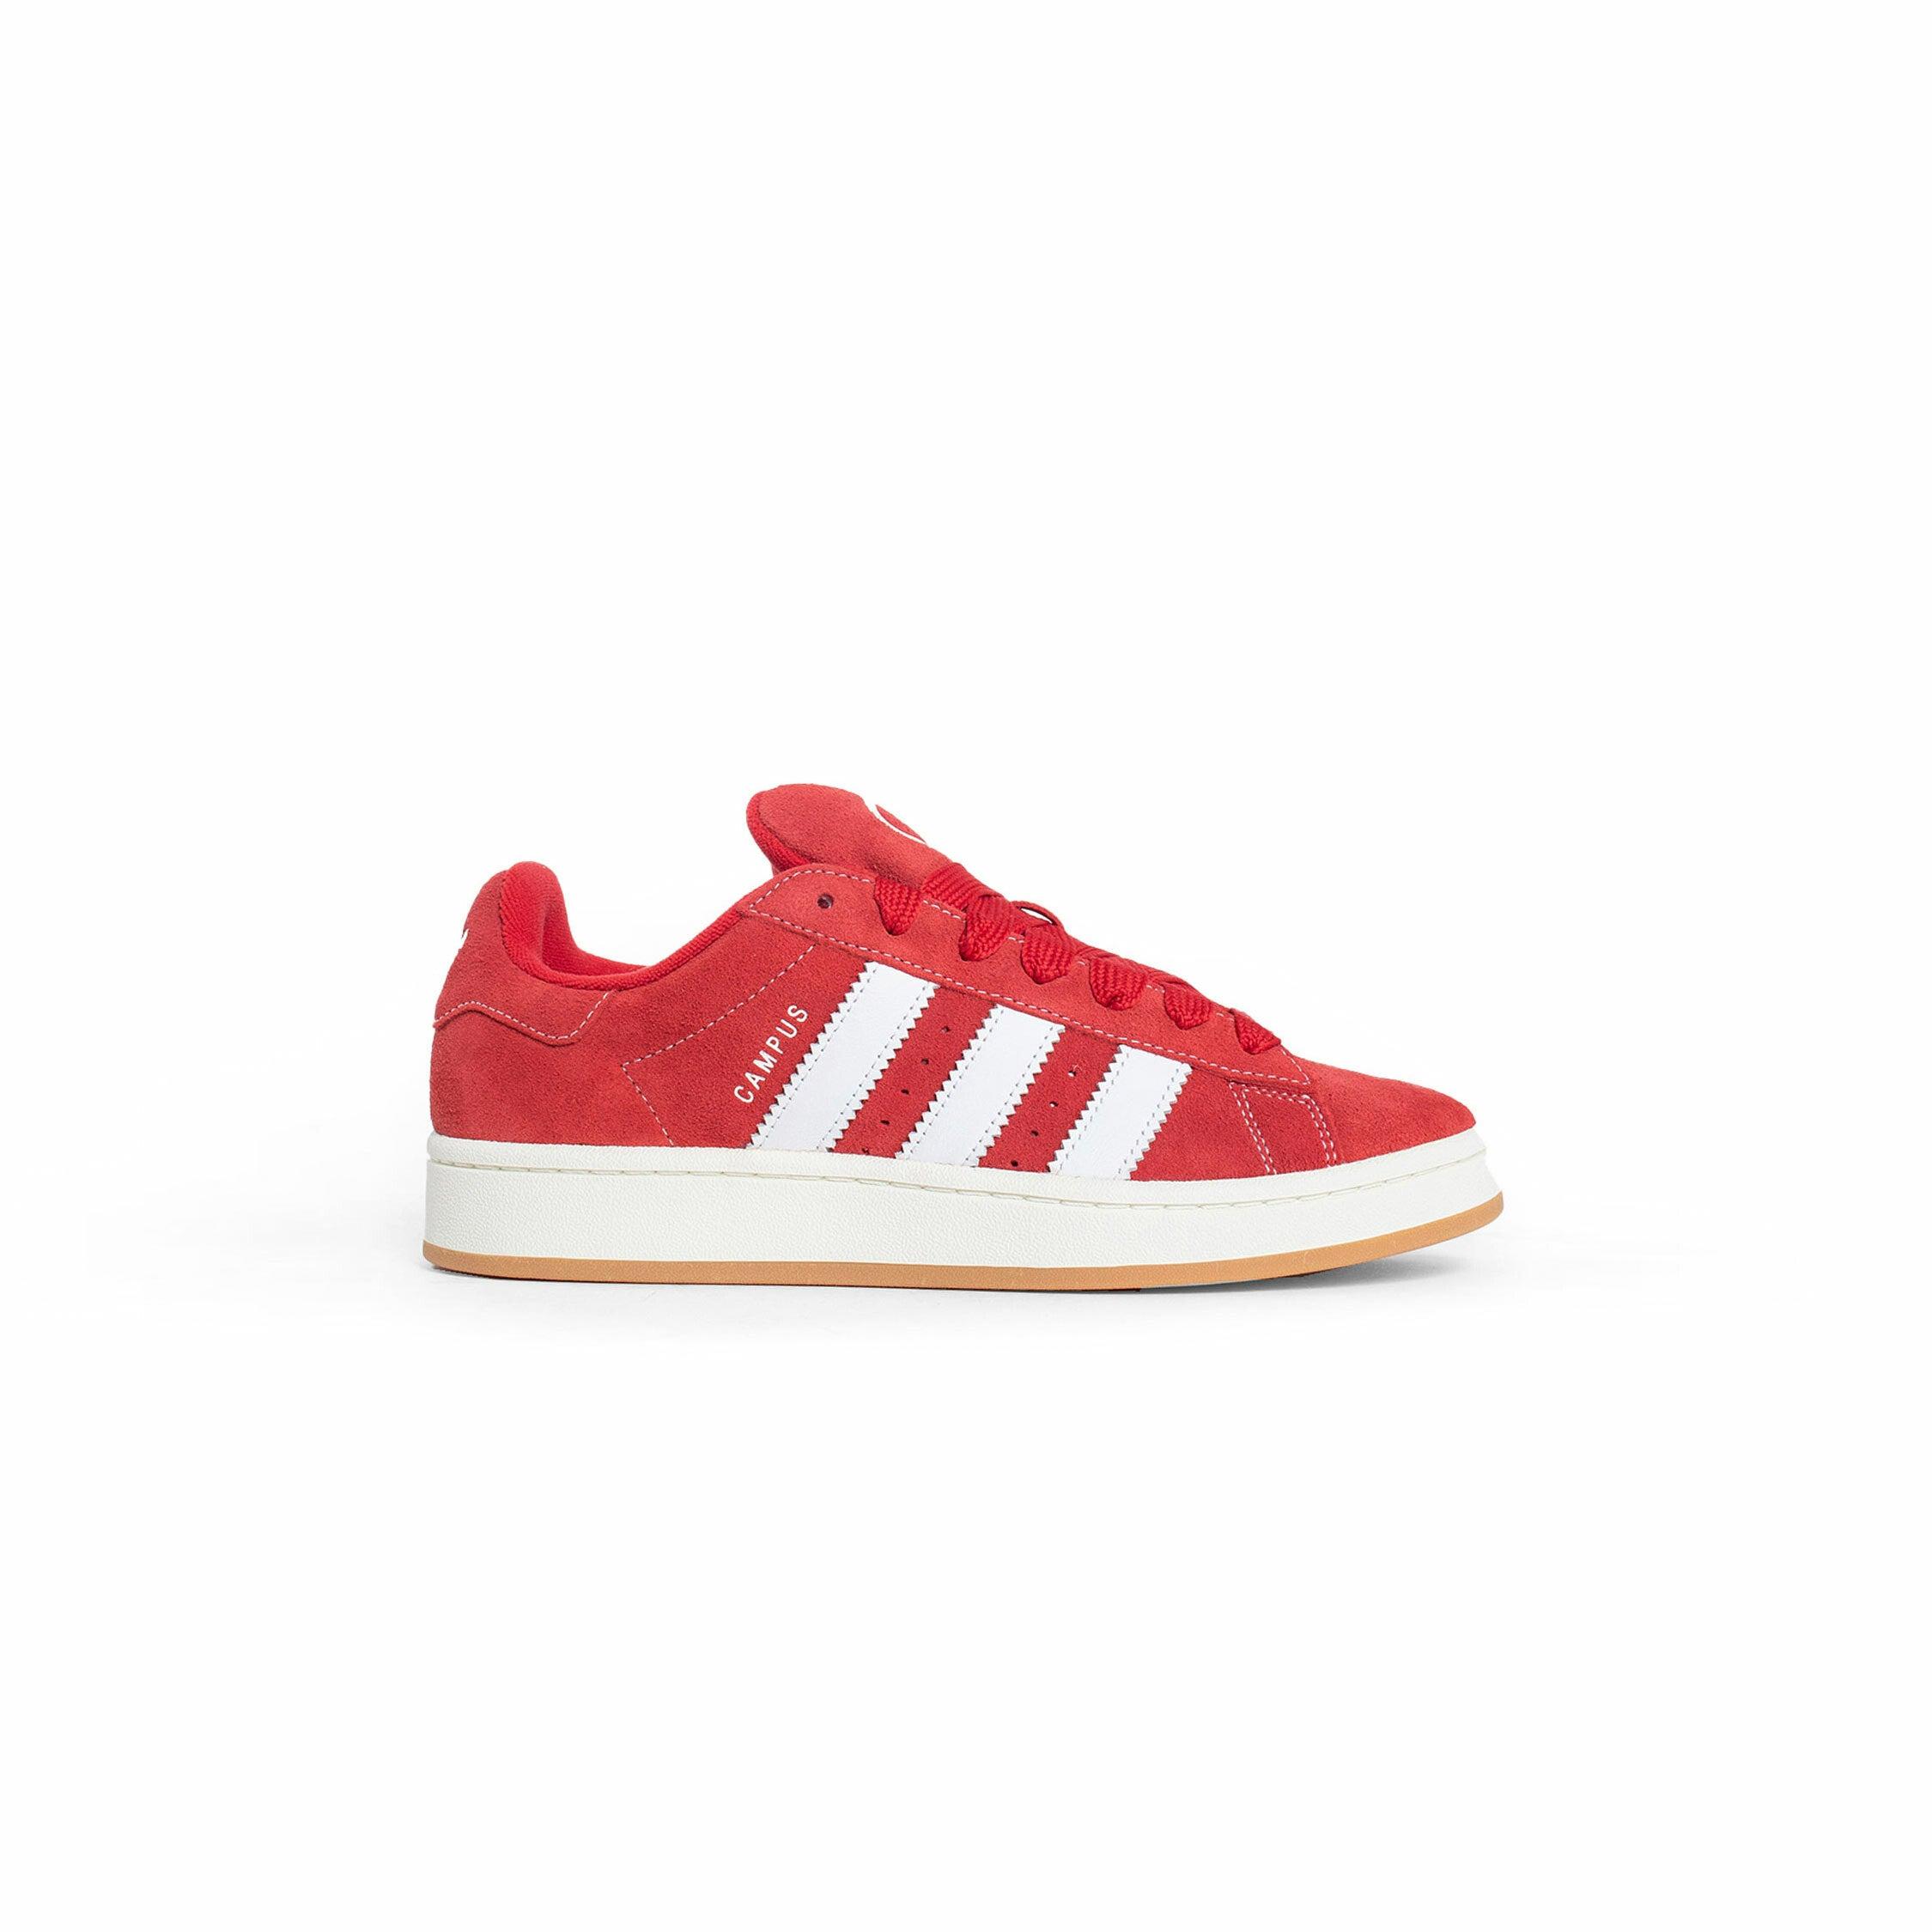 ADIDAS UNISEX RED SNEAKERS